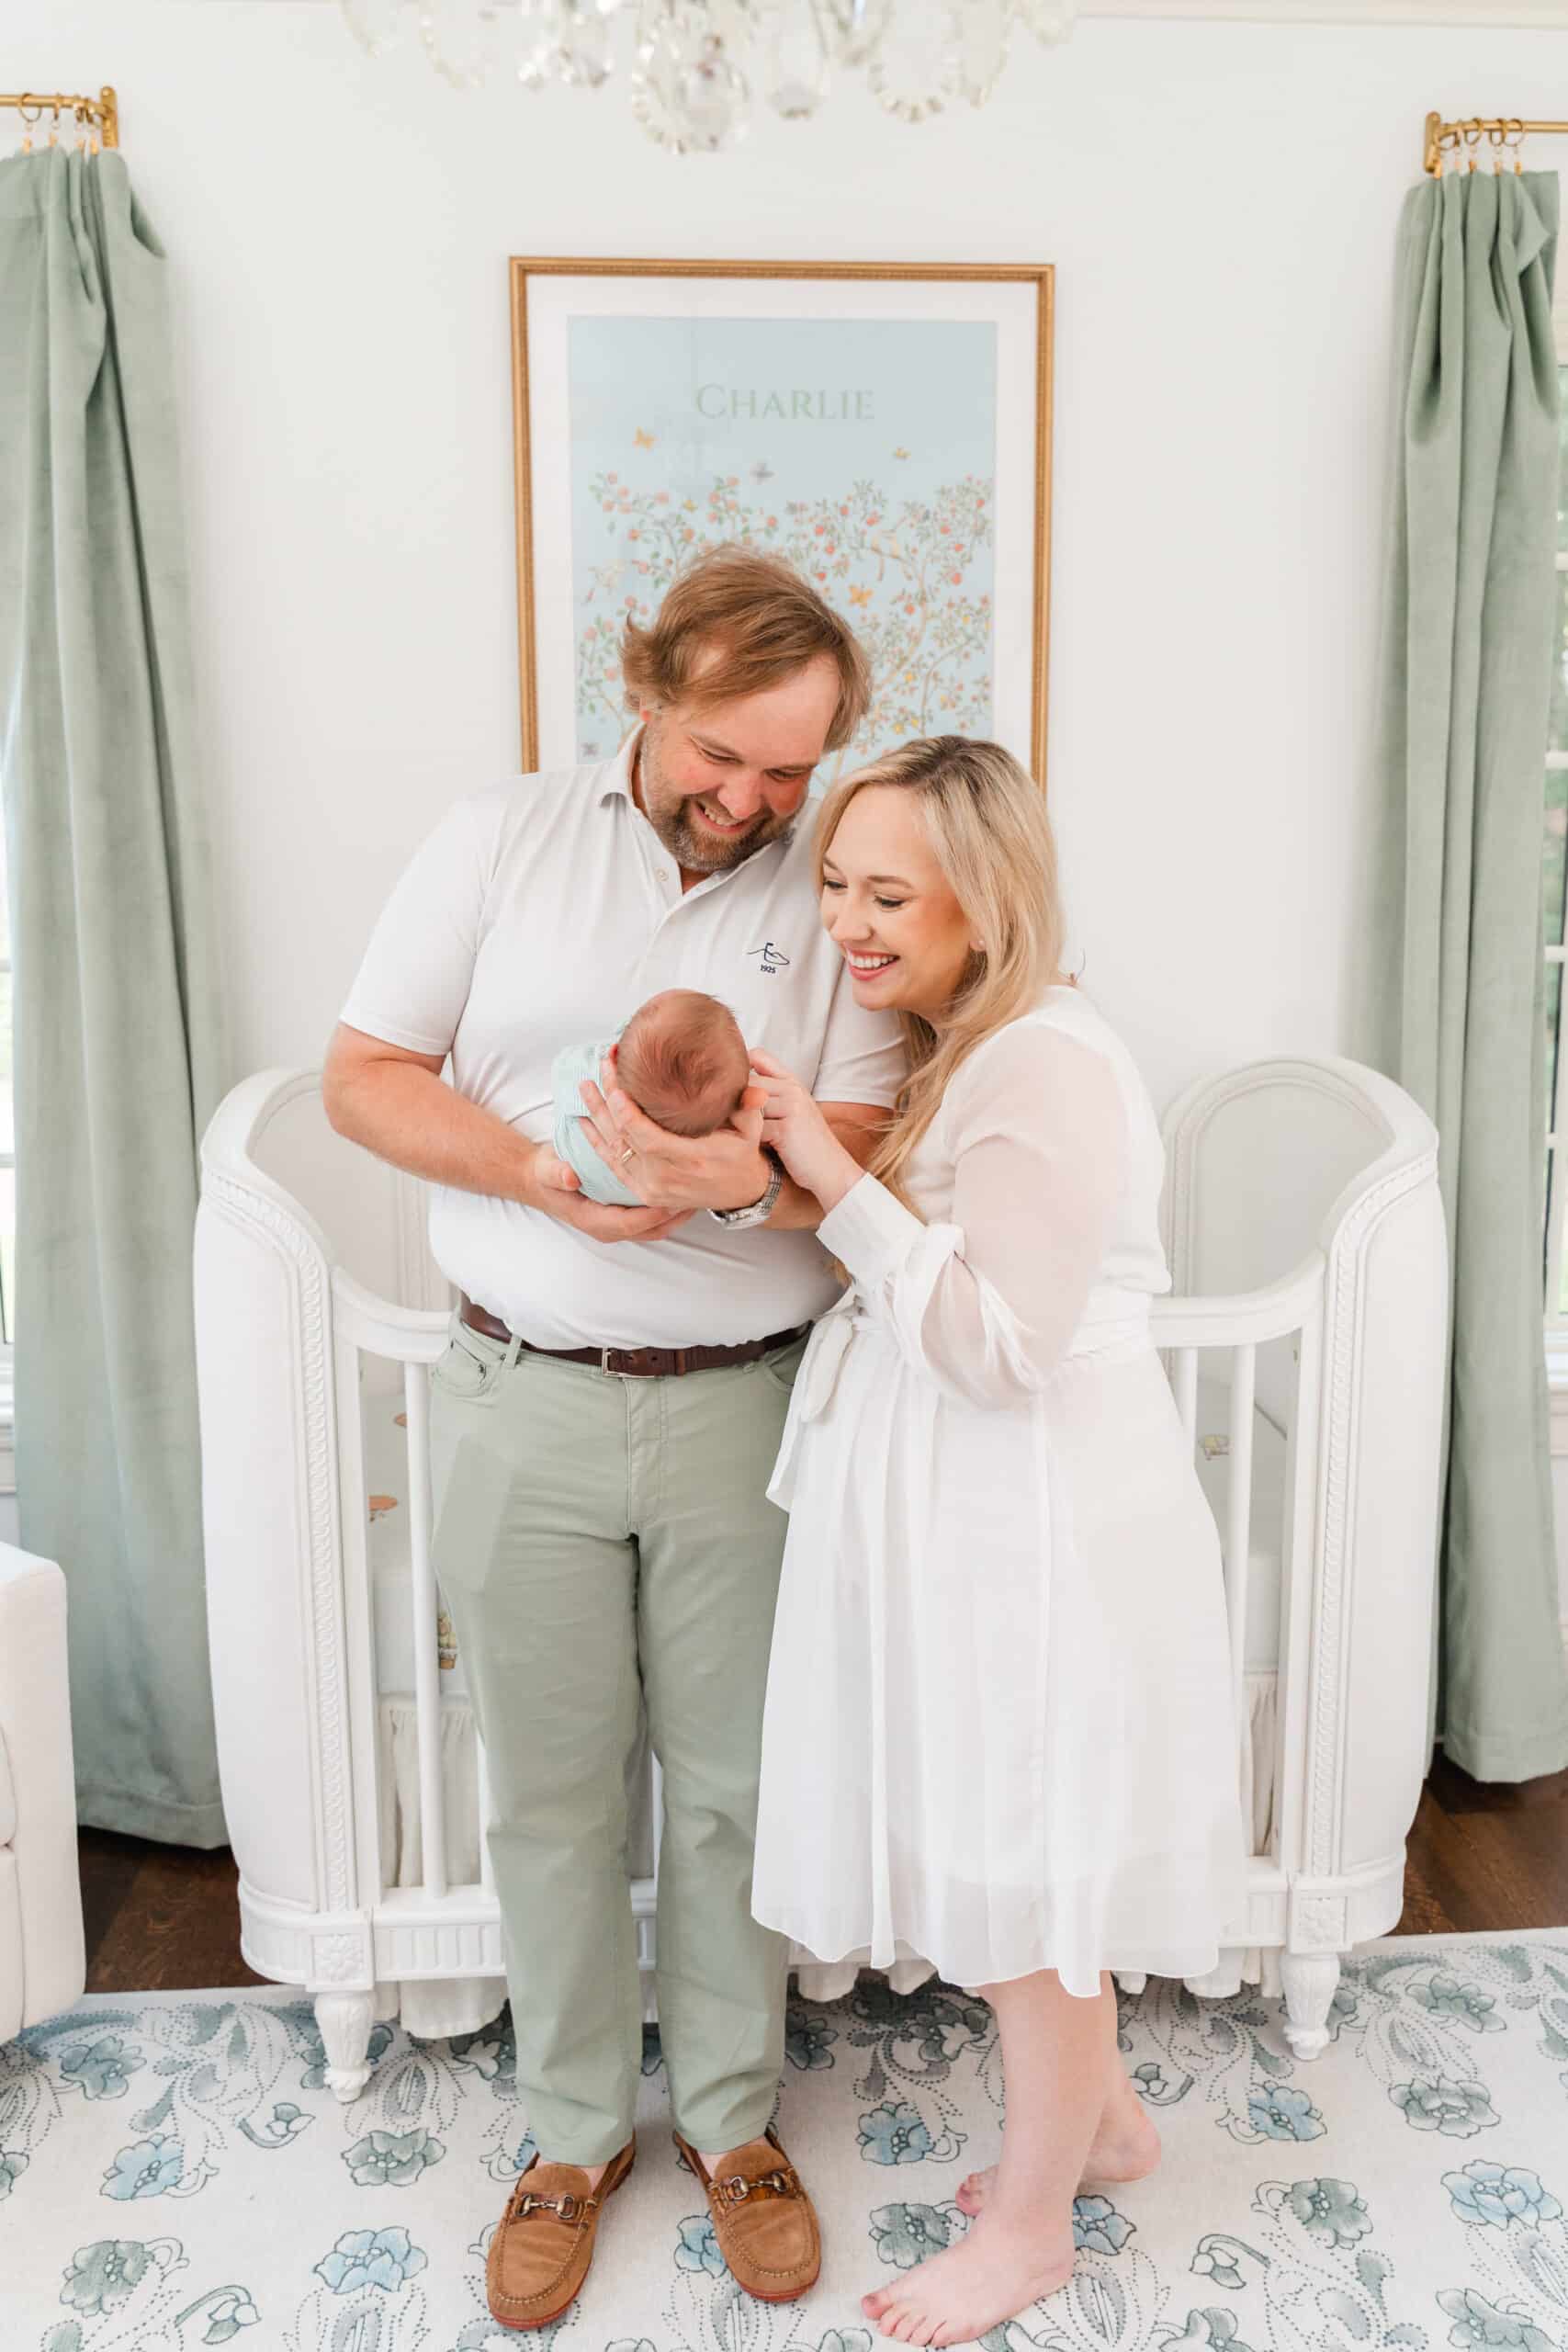 How to find a photographer. Images of couple with newborn in french country nursery. Maternity and newborn photo packages